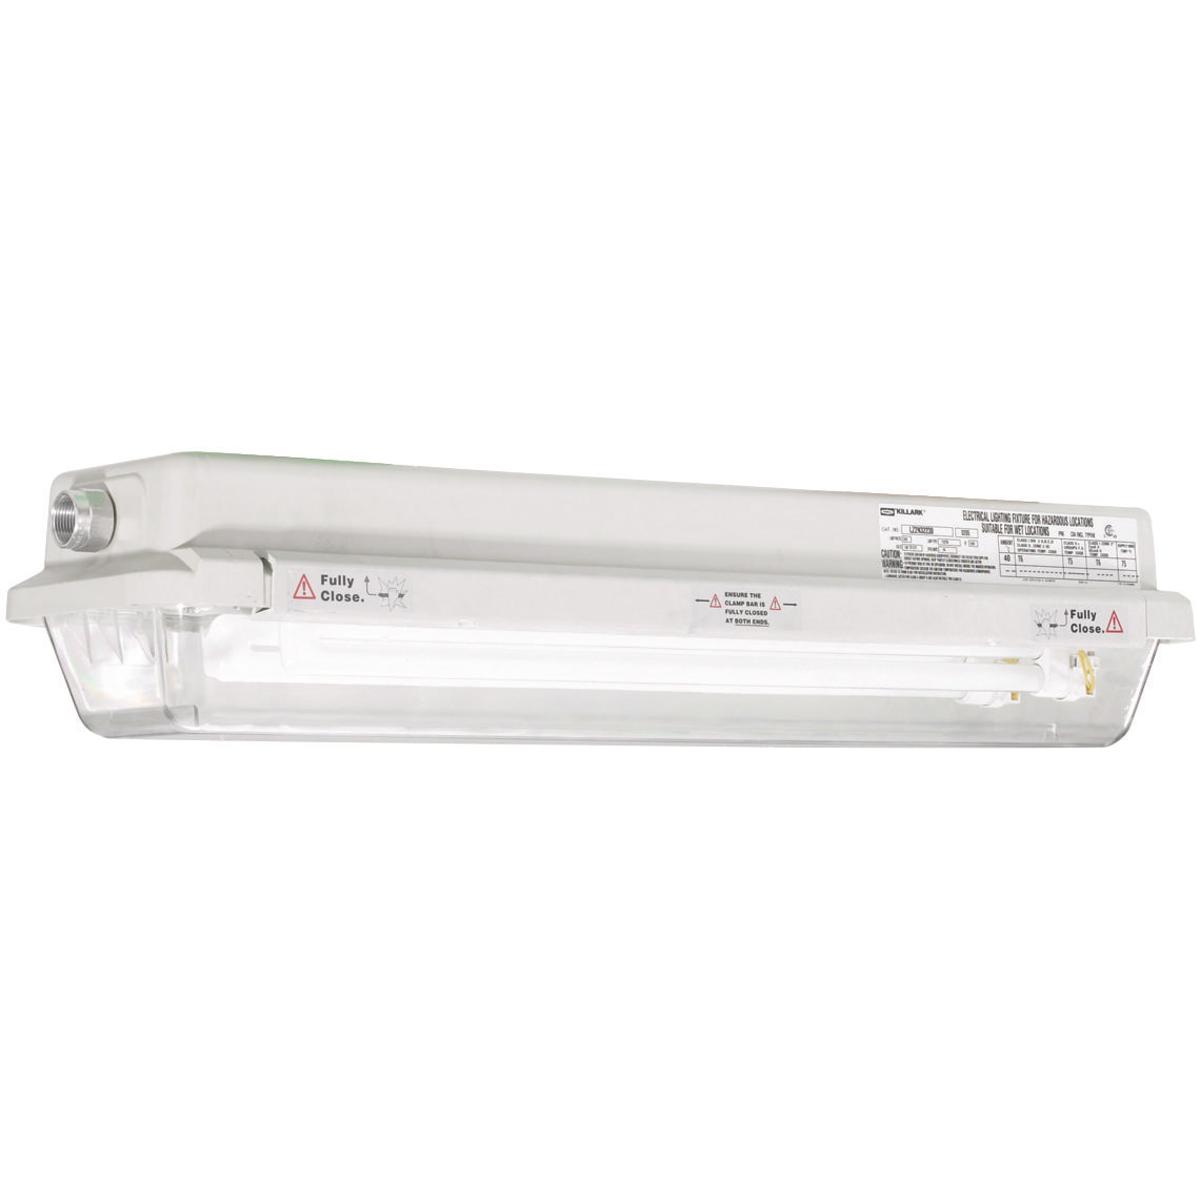 Hubbell LZ2N17330 LZ2N Series - 17W 120-277V - 2' 3-Lamp T8 - Electronic 50/60 Hz 0°F Start Medium Bi-Pin  ; Lexan® Clear Lens, impact resistant polycarbonate ; Housing-one piece fiberglass reinforced polyester, NEMA 4X & IP66 rated. ; Two 3/4” NTP aluminum hubs - one at e